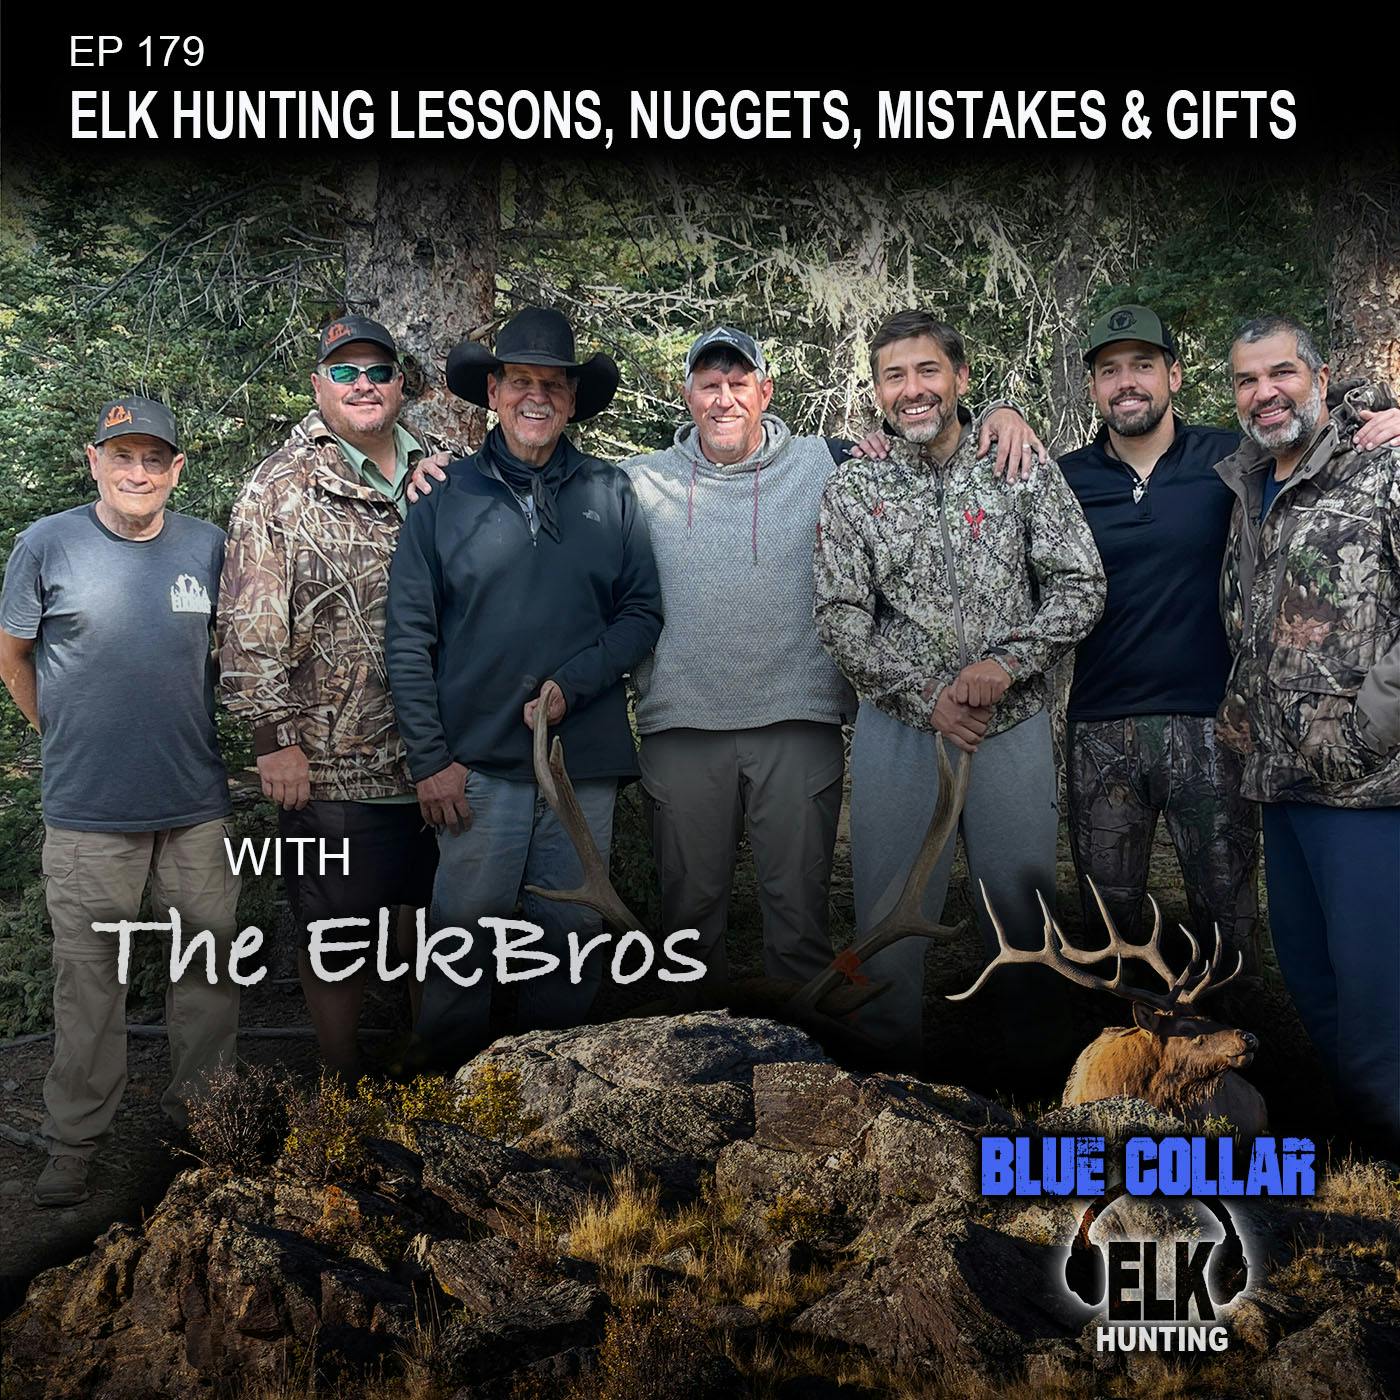 EP 179: Elk Hunting Lessons, Nuggets, Mistakes & Gifts